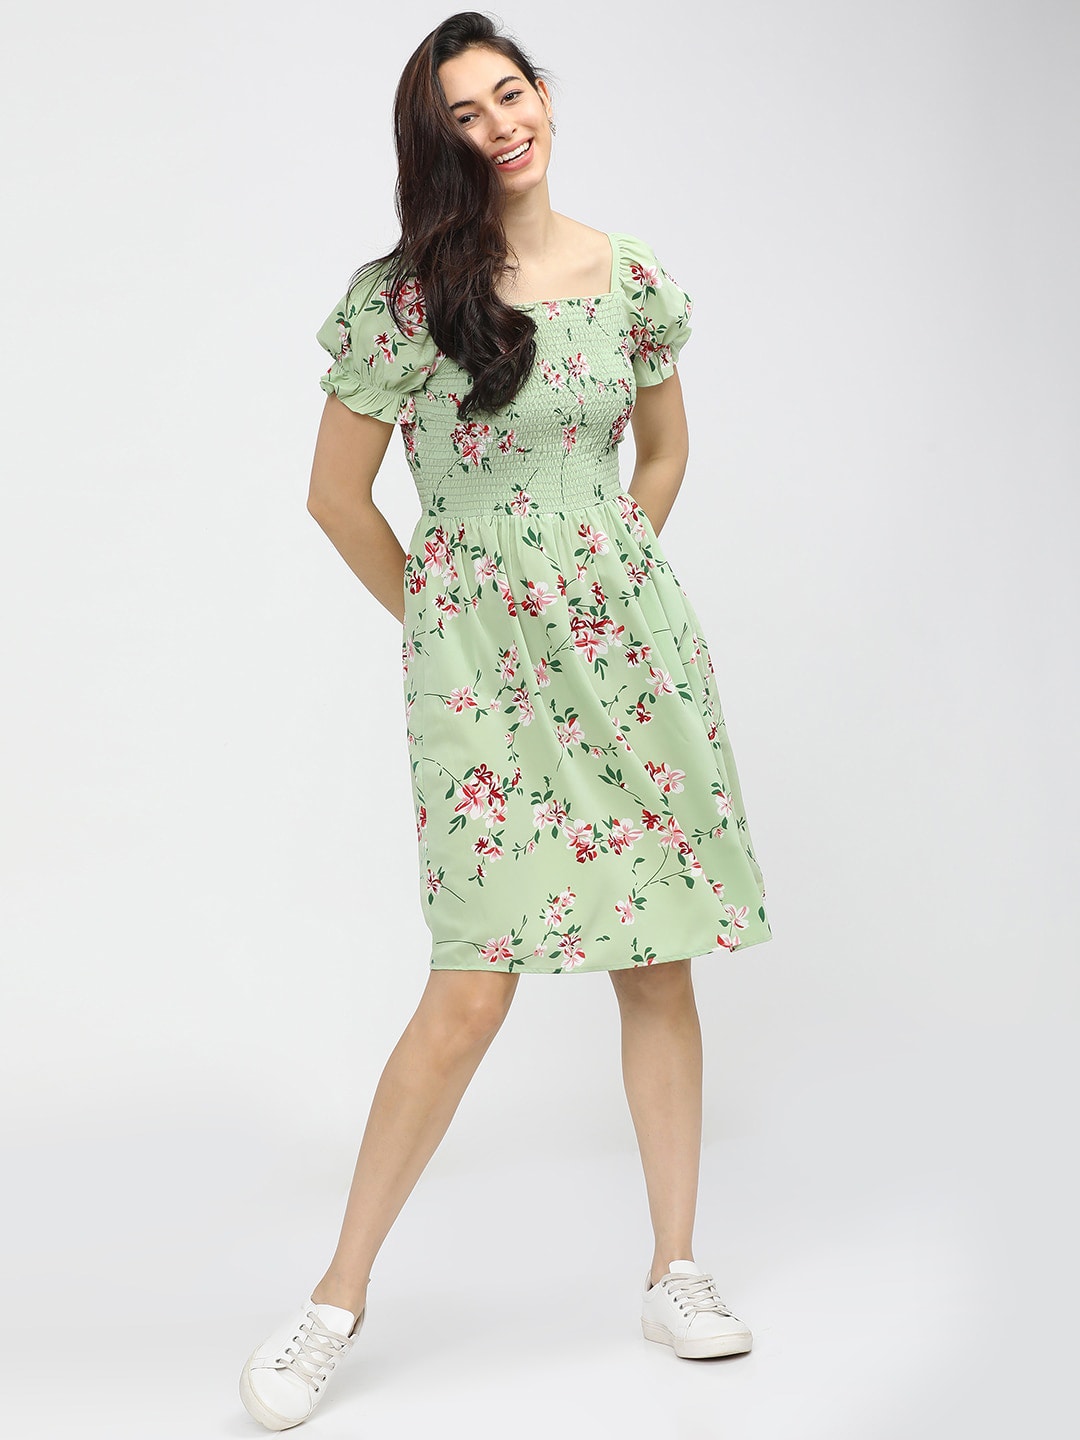 Tokyo Talkies Green & Pink Floral A-Line Dress Price in India